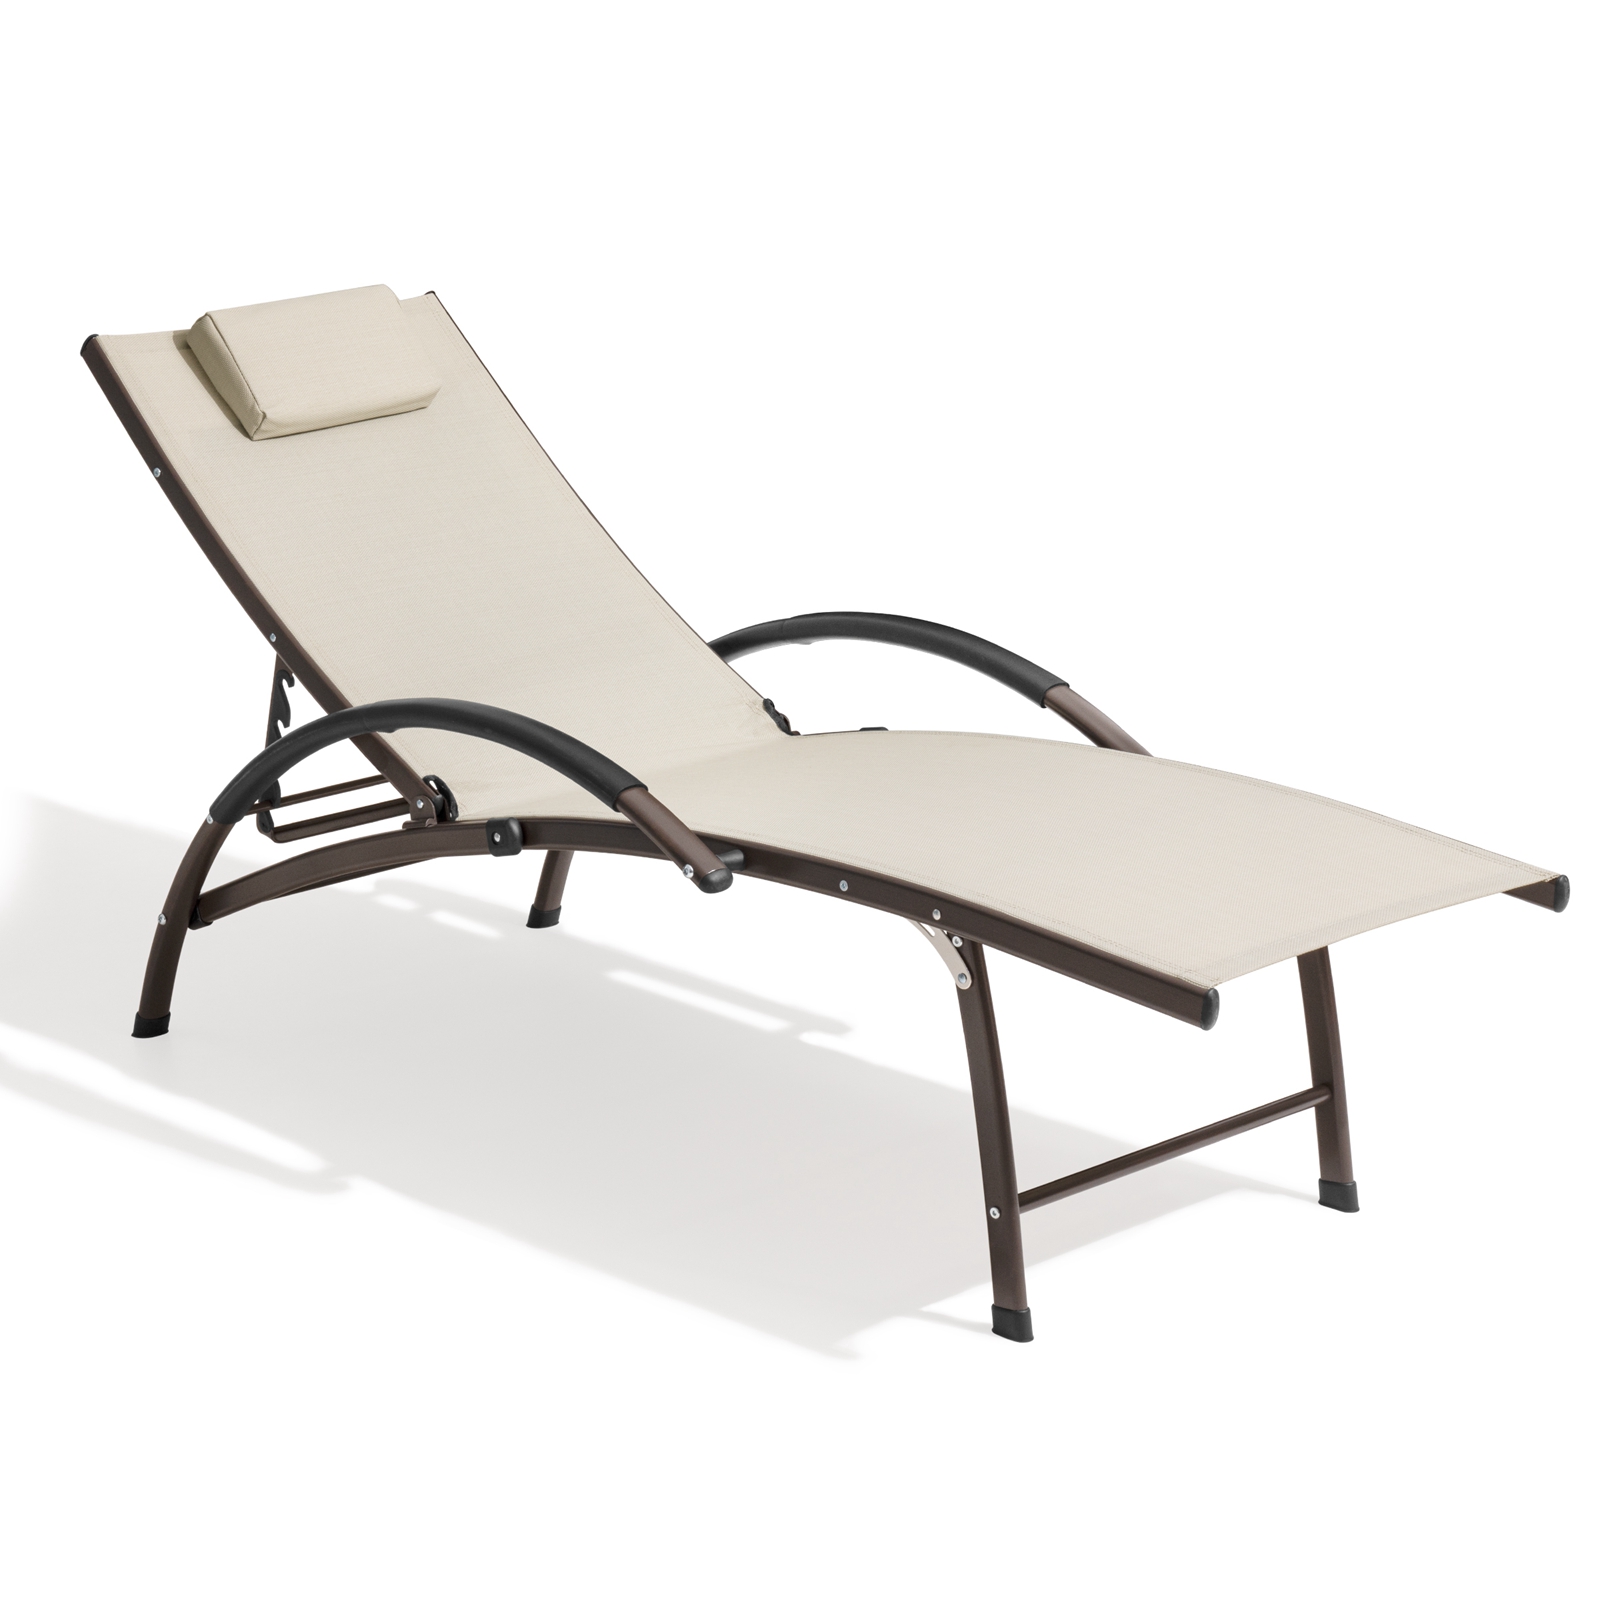 Crestlive Products Aluminum Outdoor Folding Reclining Chaise Lounge Chair in Tan - image 1 of 7